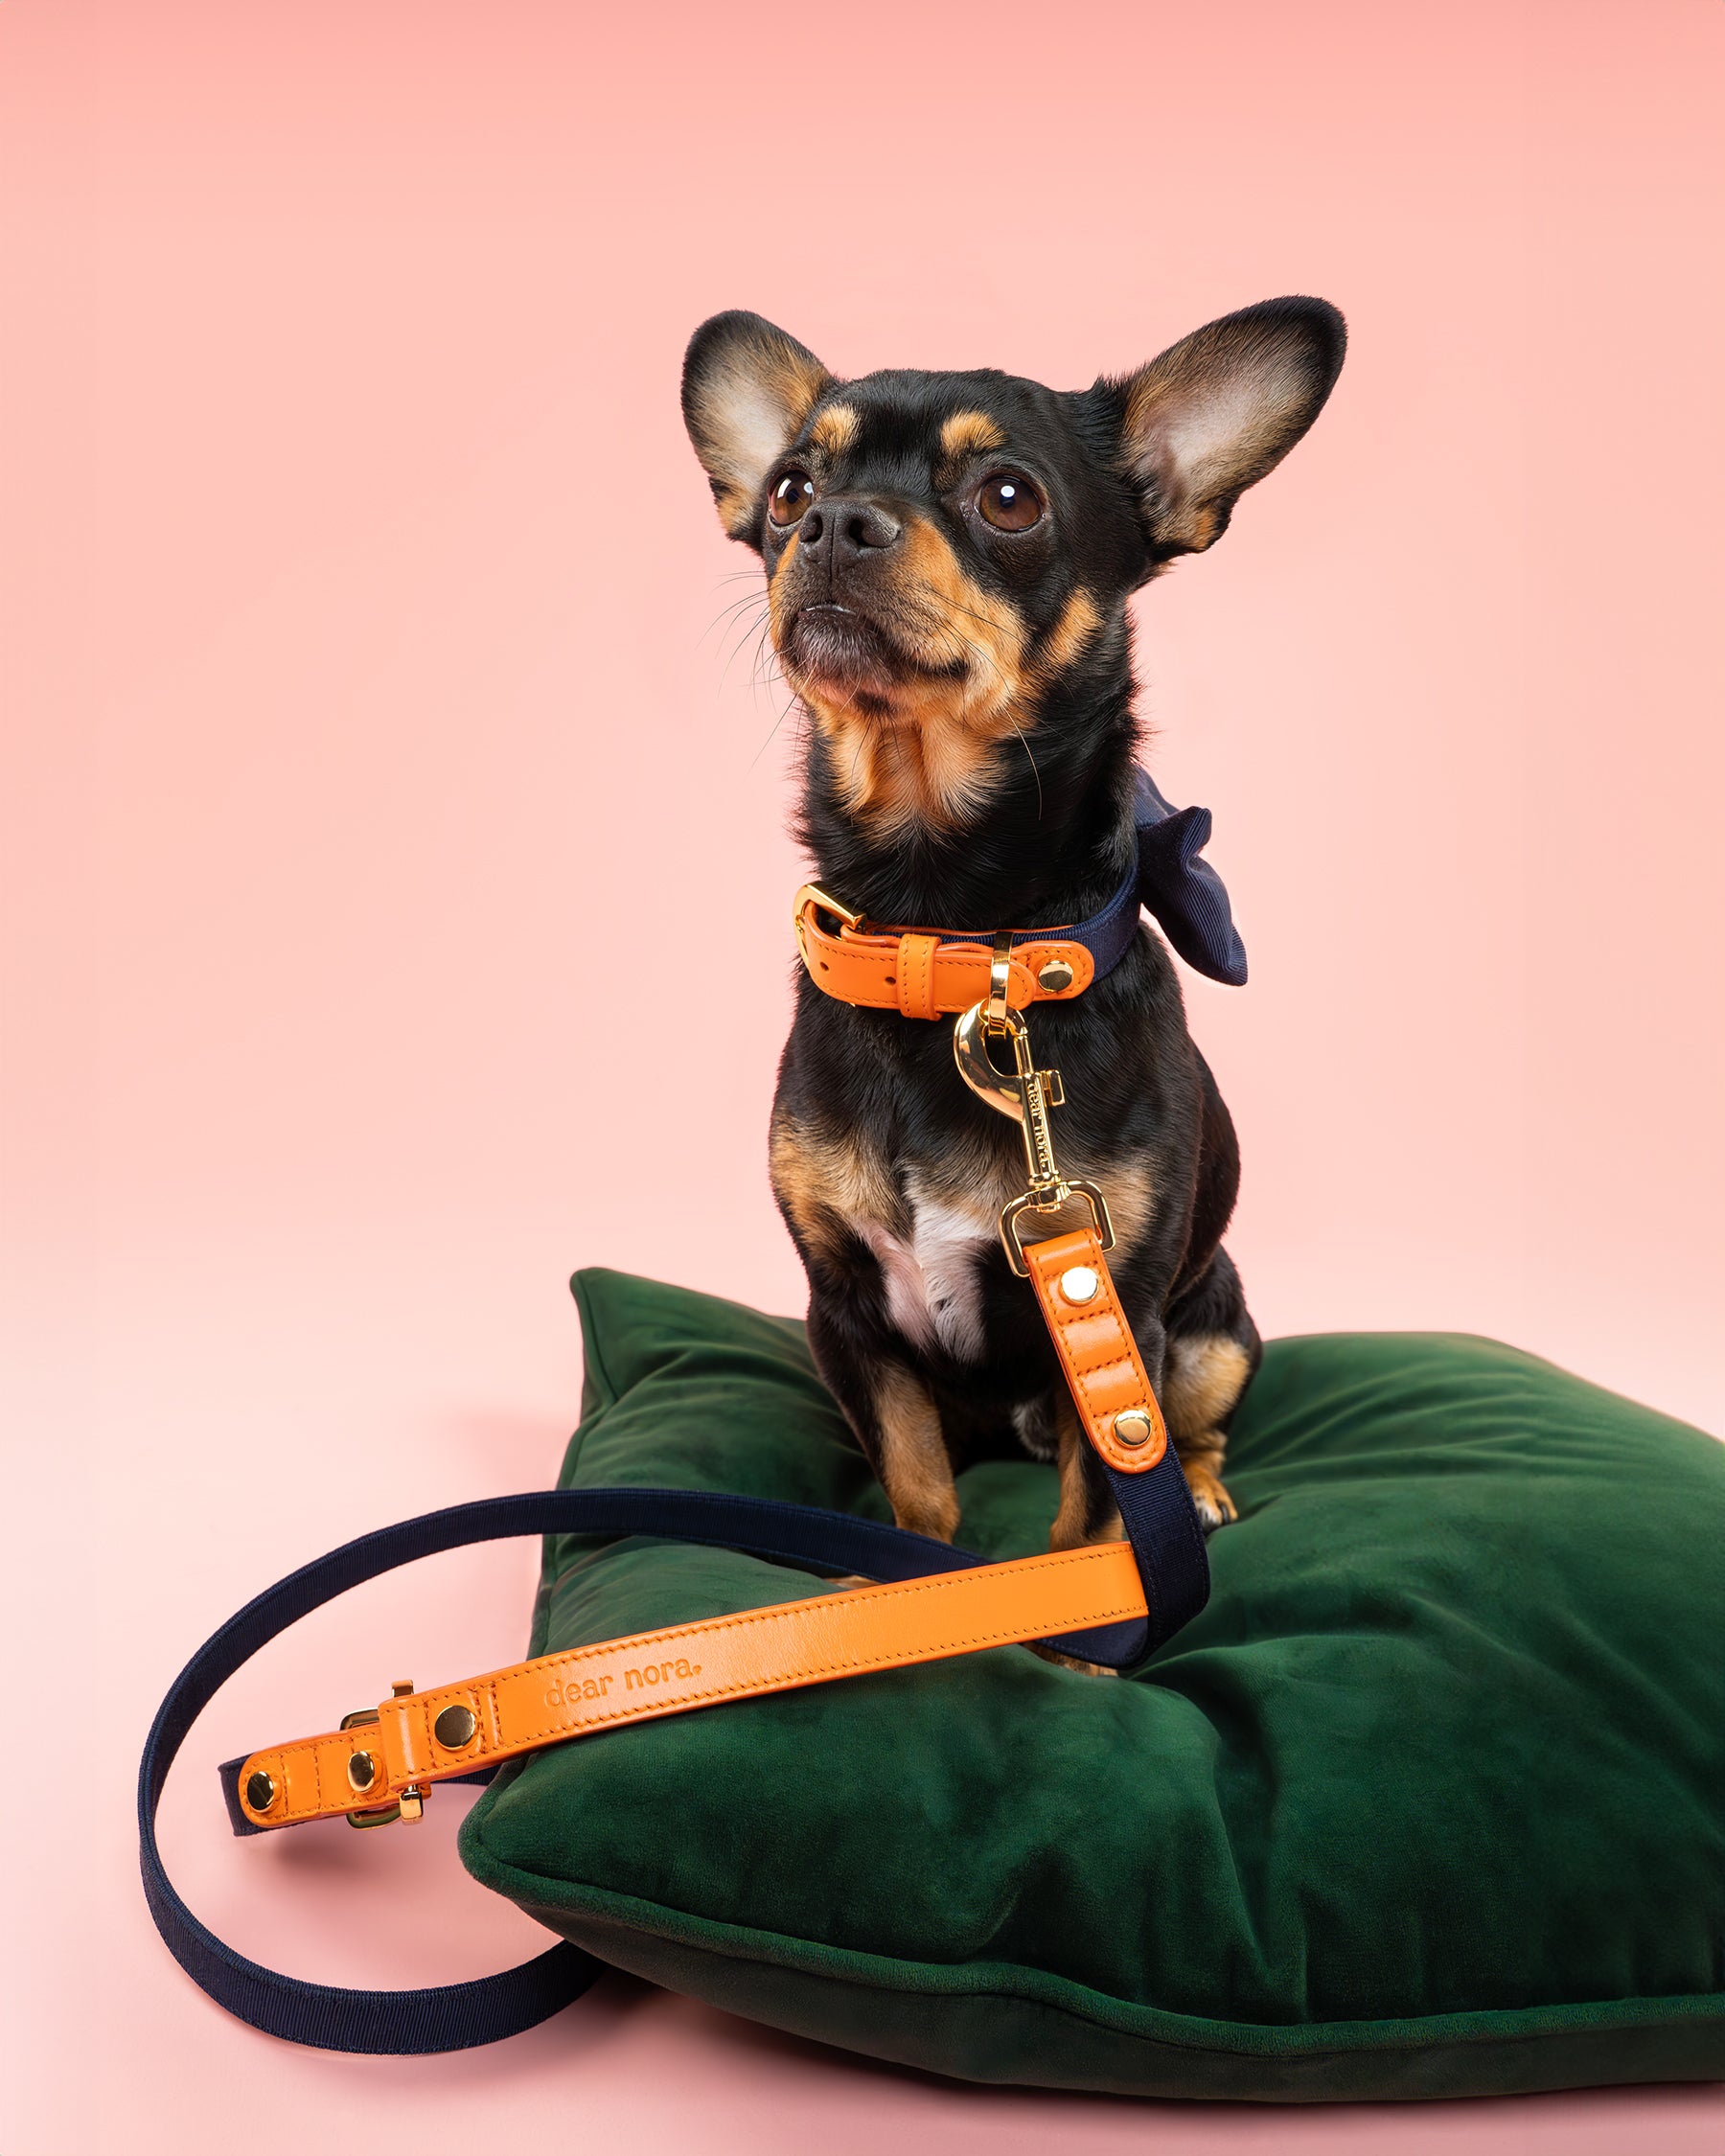 Chihuahua modelling a Dear Nora Tangerine dog accessories set, pink background - orange leather and navy blue fabric - collar, leash, poop bag holder and bow